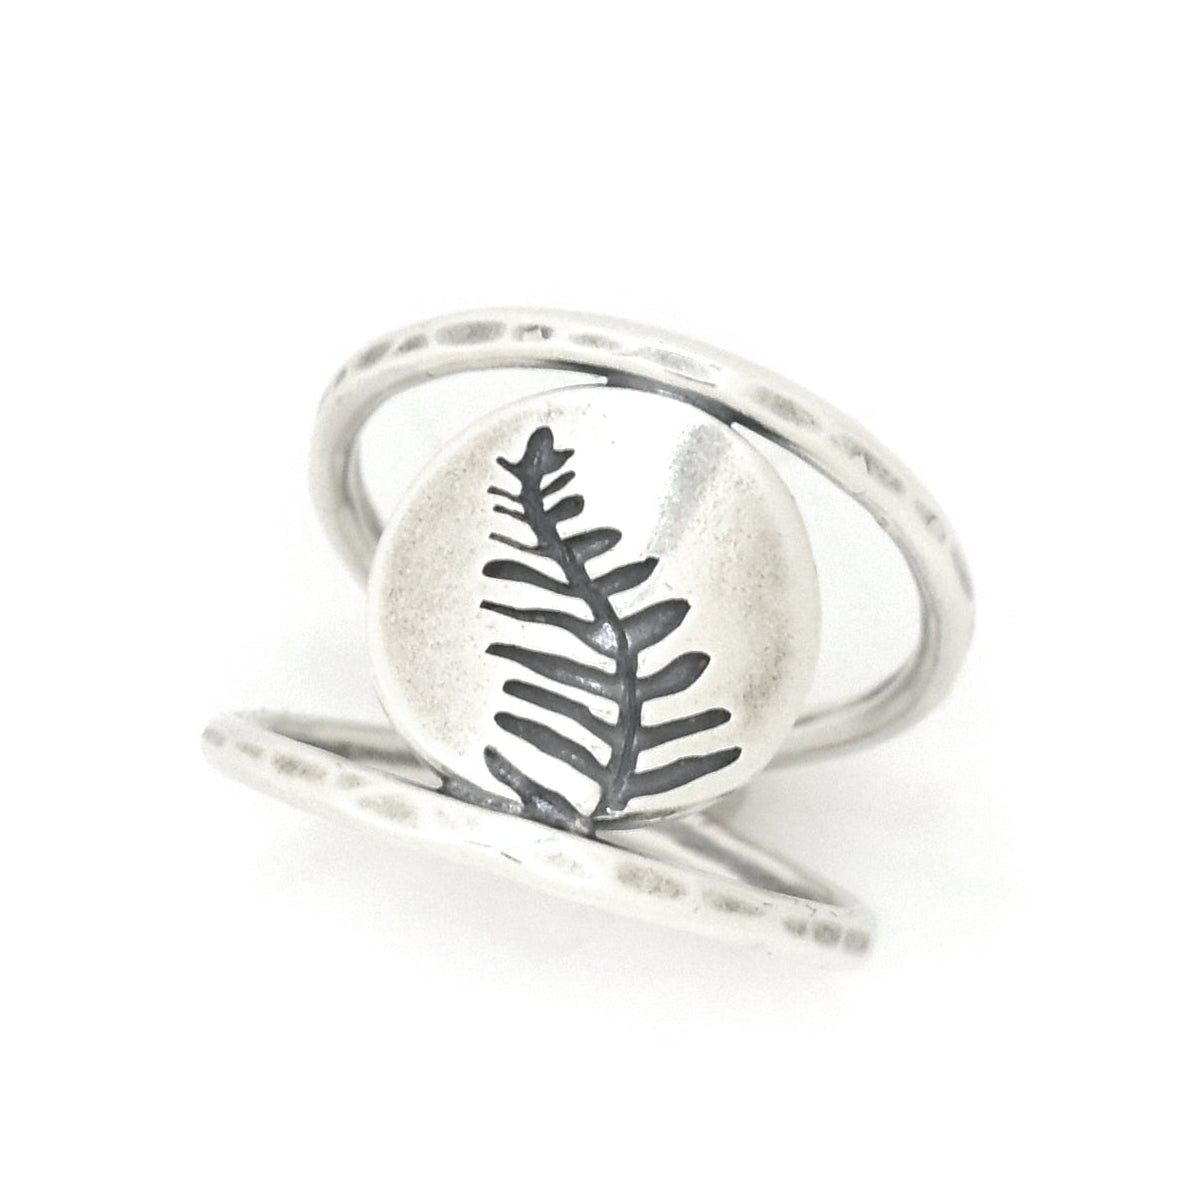 Fern Frond Double Band Ring - Ring Select Size 4 6976 - handmade by Beth Millner Jewelry